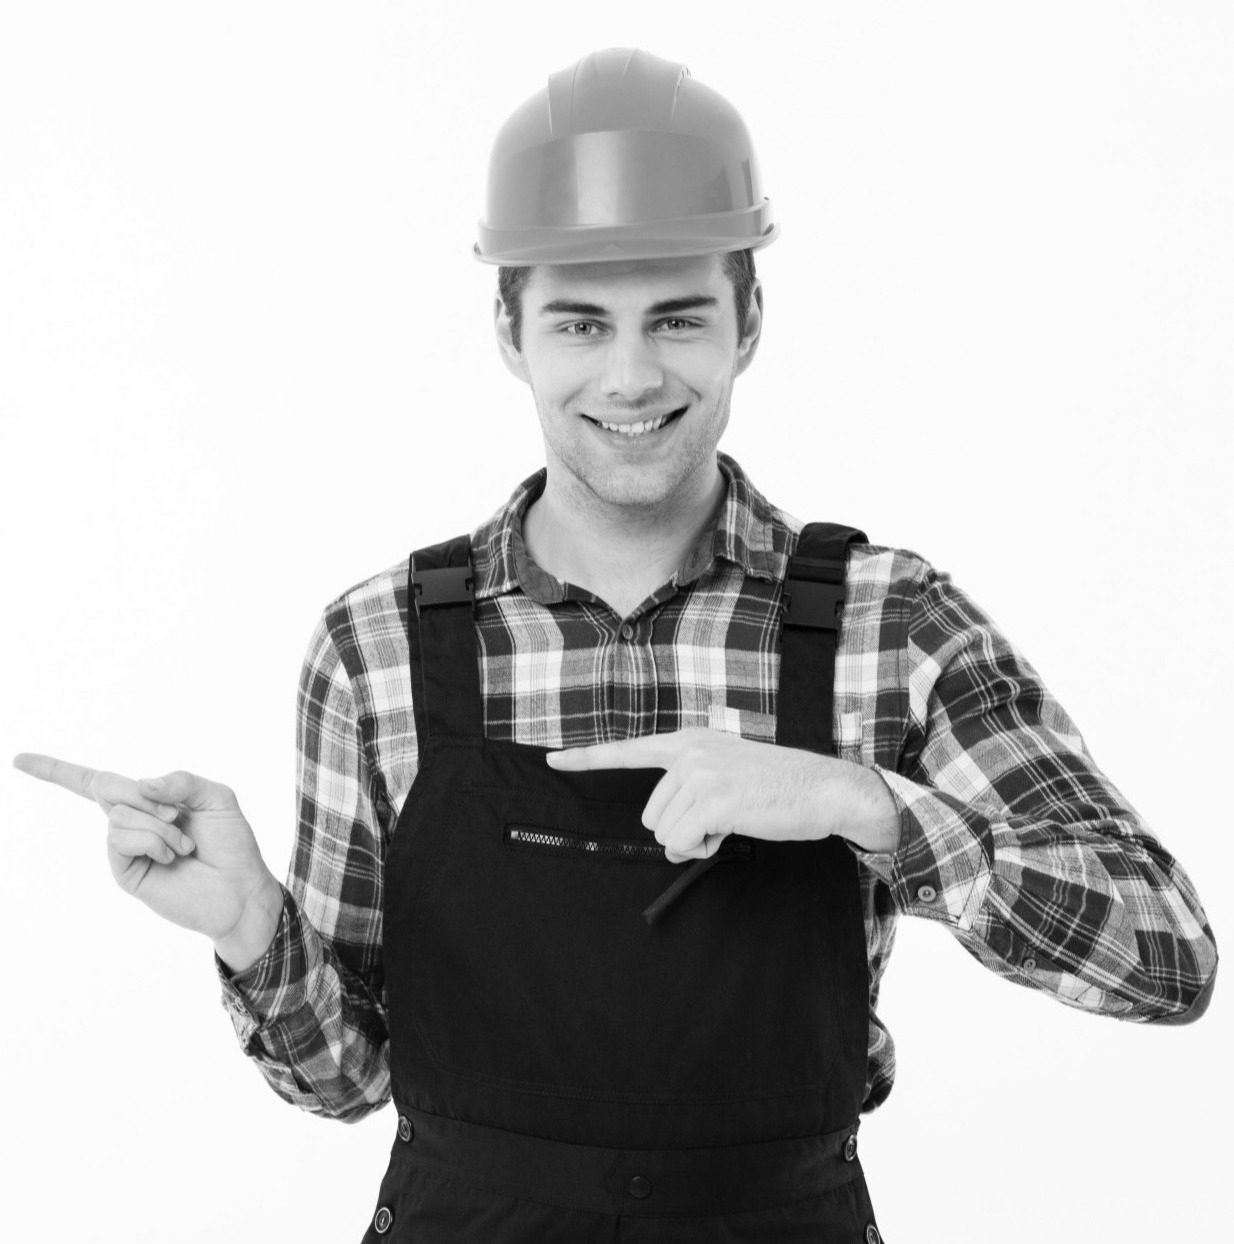 https://garrdal.com/wp-content/uploads/2022/02/portrait-smiling-young-male-builder-pointing-modified-1.jpg